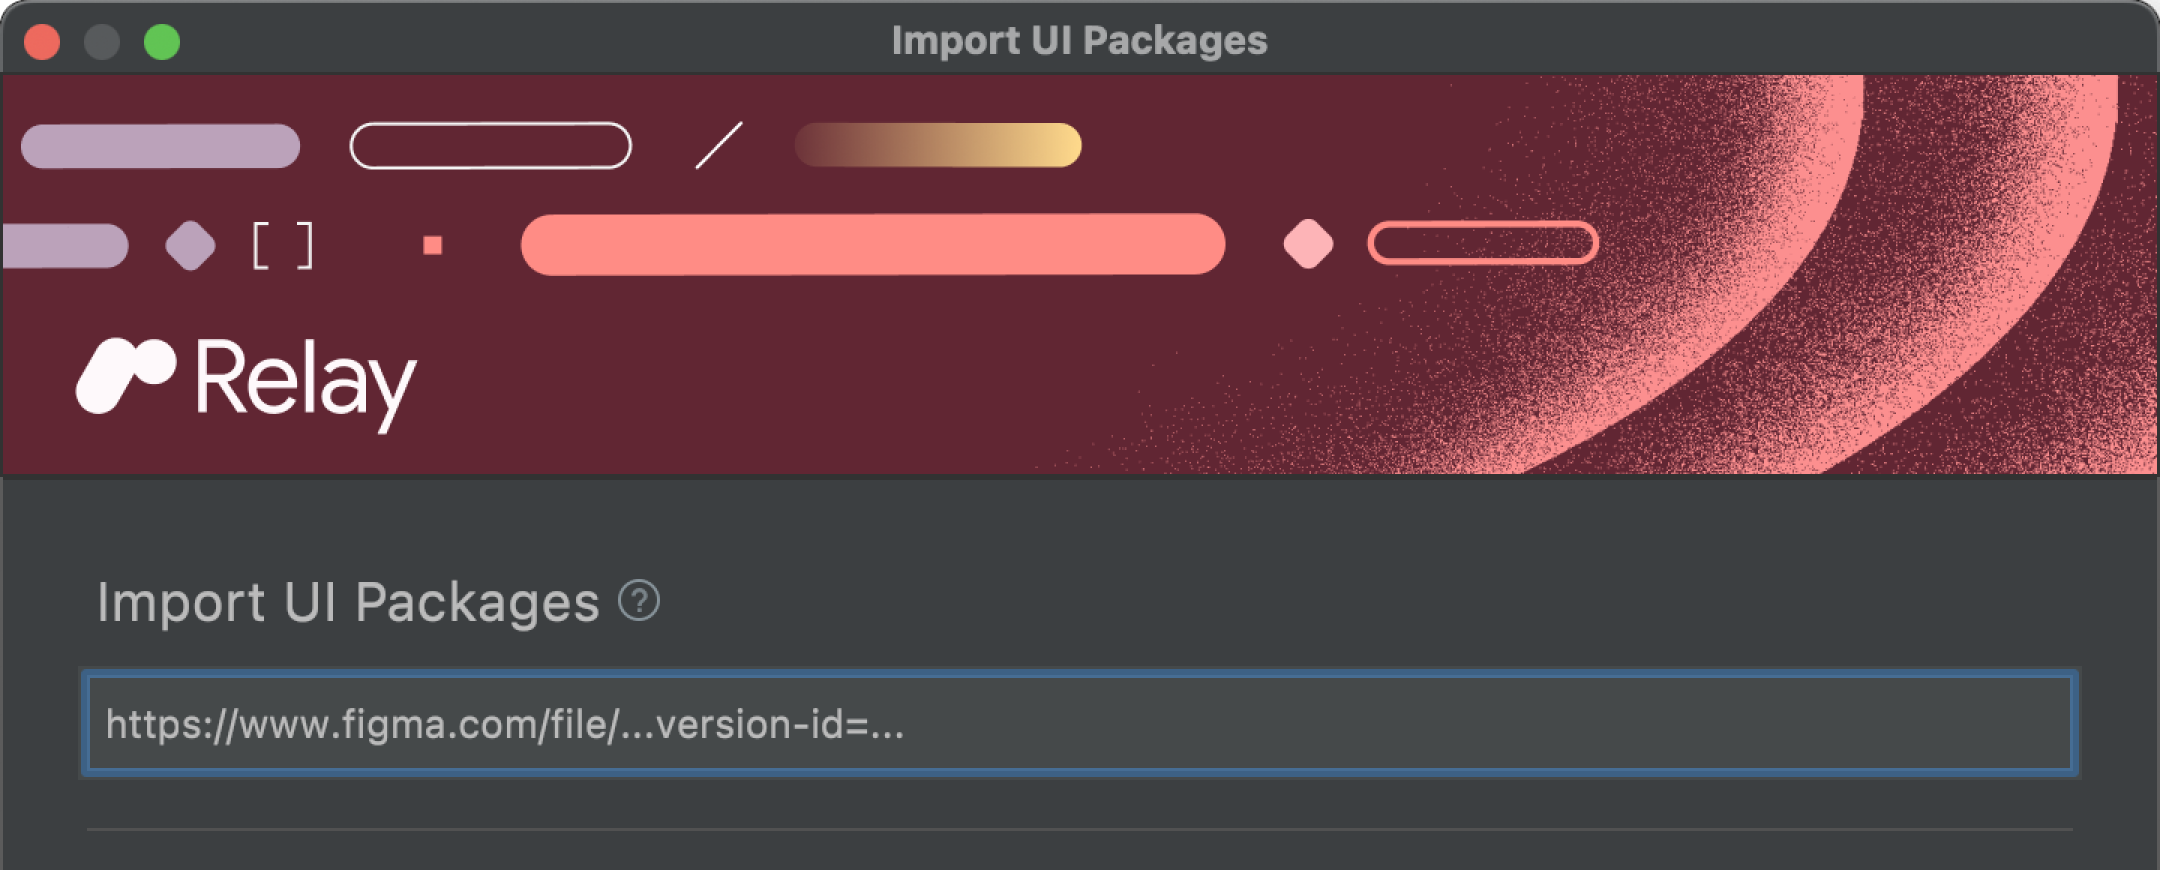 Import UI Packages field in the import dialog